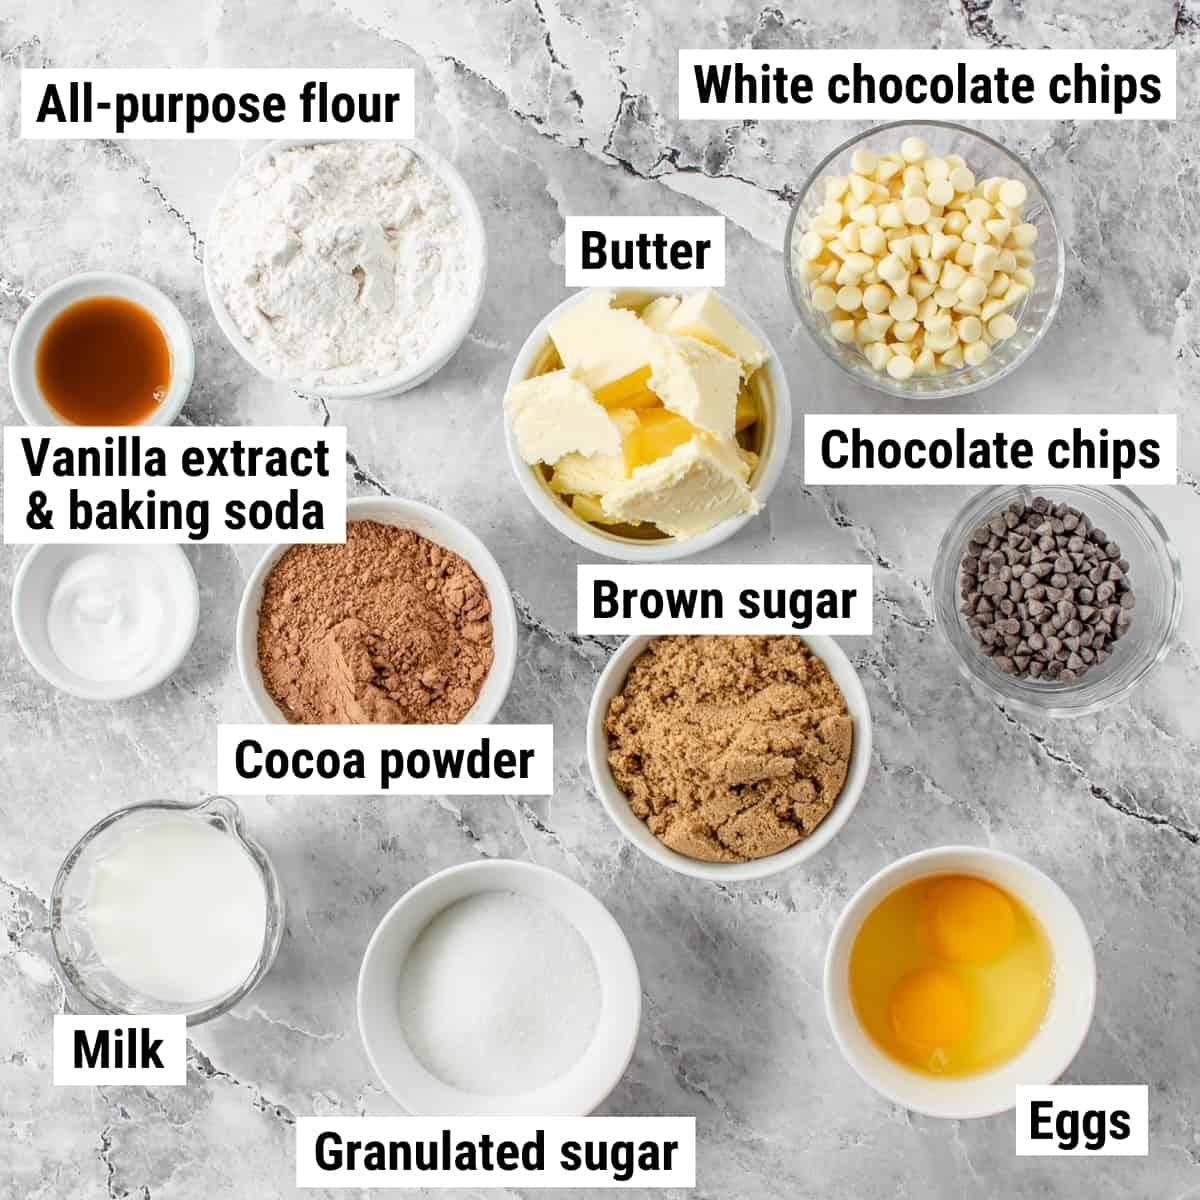 The ingredients to make white chocolate chip brownies spread out on a table.